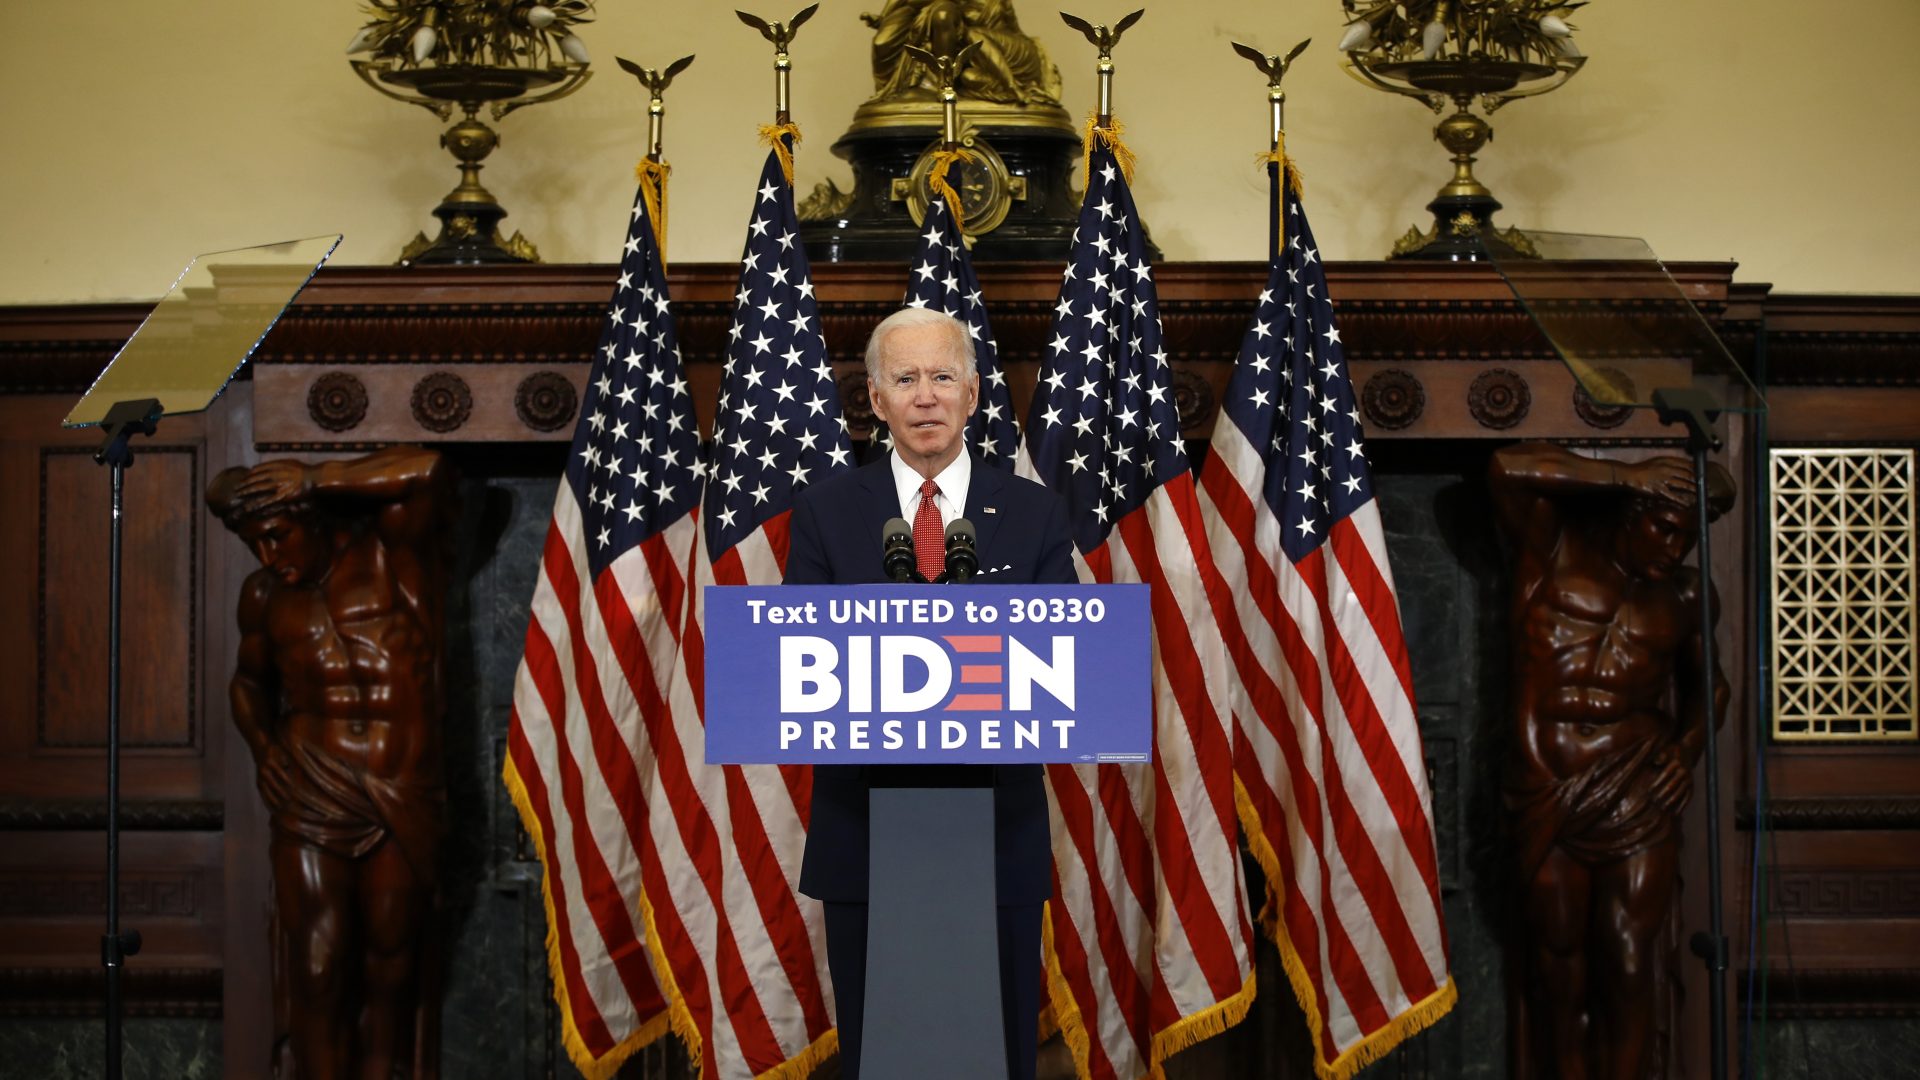 Former Vice President Joe Biden, the presumptive Democratic presidential nominee, speaks in Philadelphia on Tuesday following days of protests after the death of George Floyd in police custody.